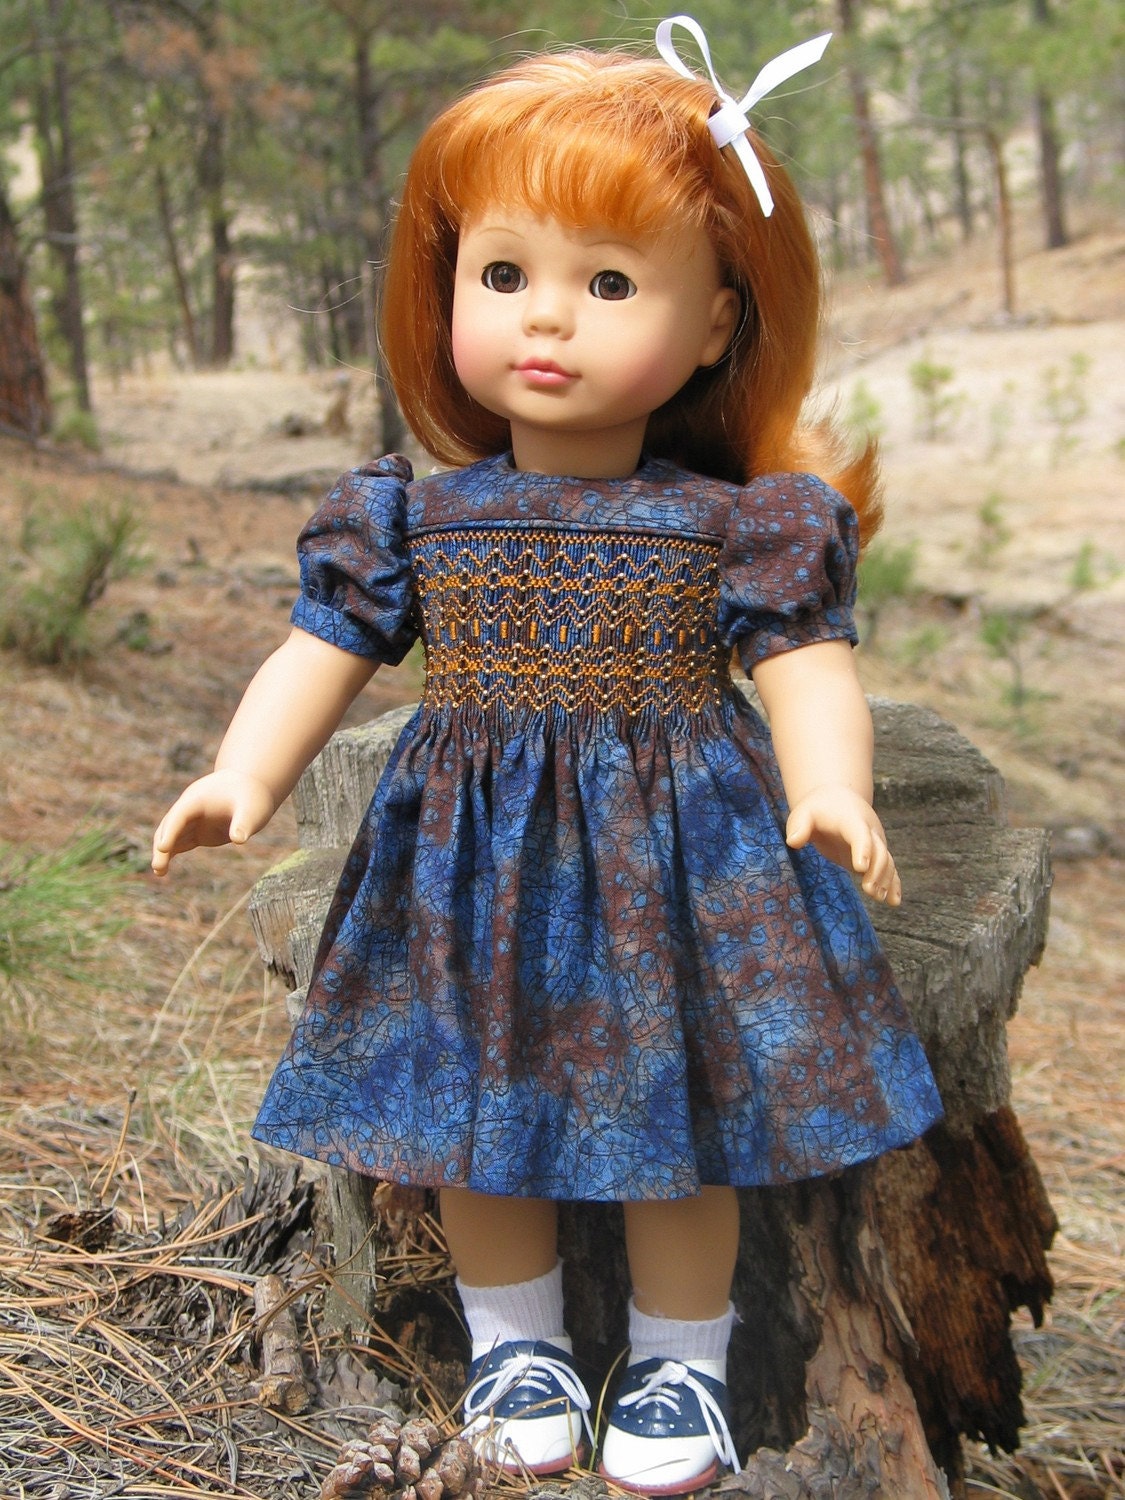 Downloadable Helen Smocked Doll Dress Pattern For 18 Inch American Girl